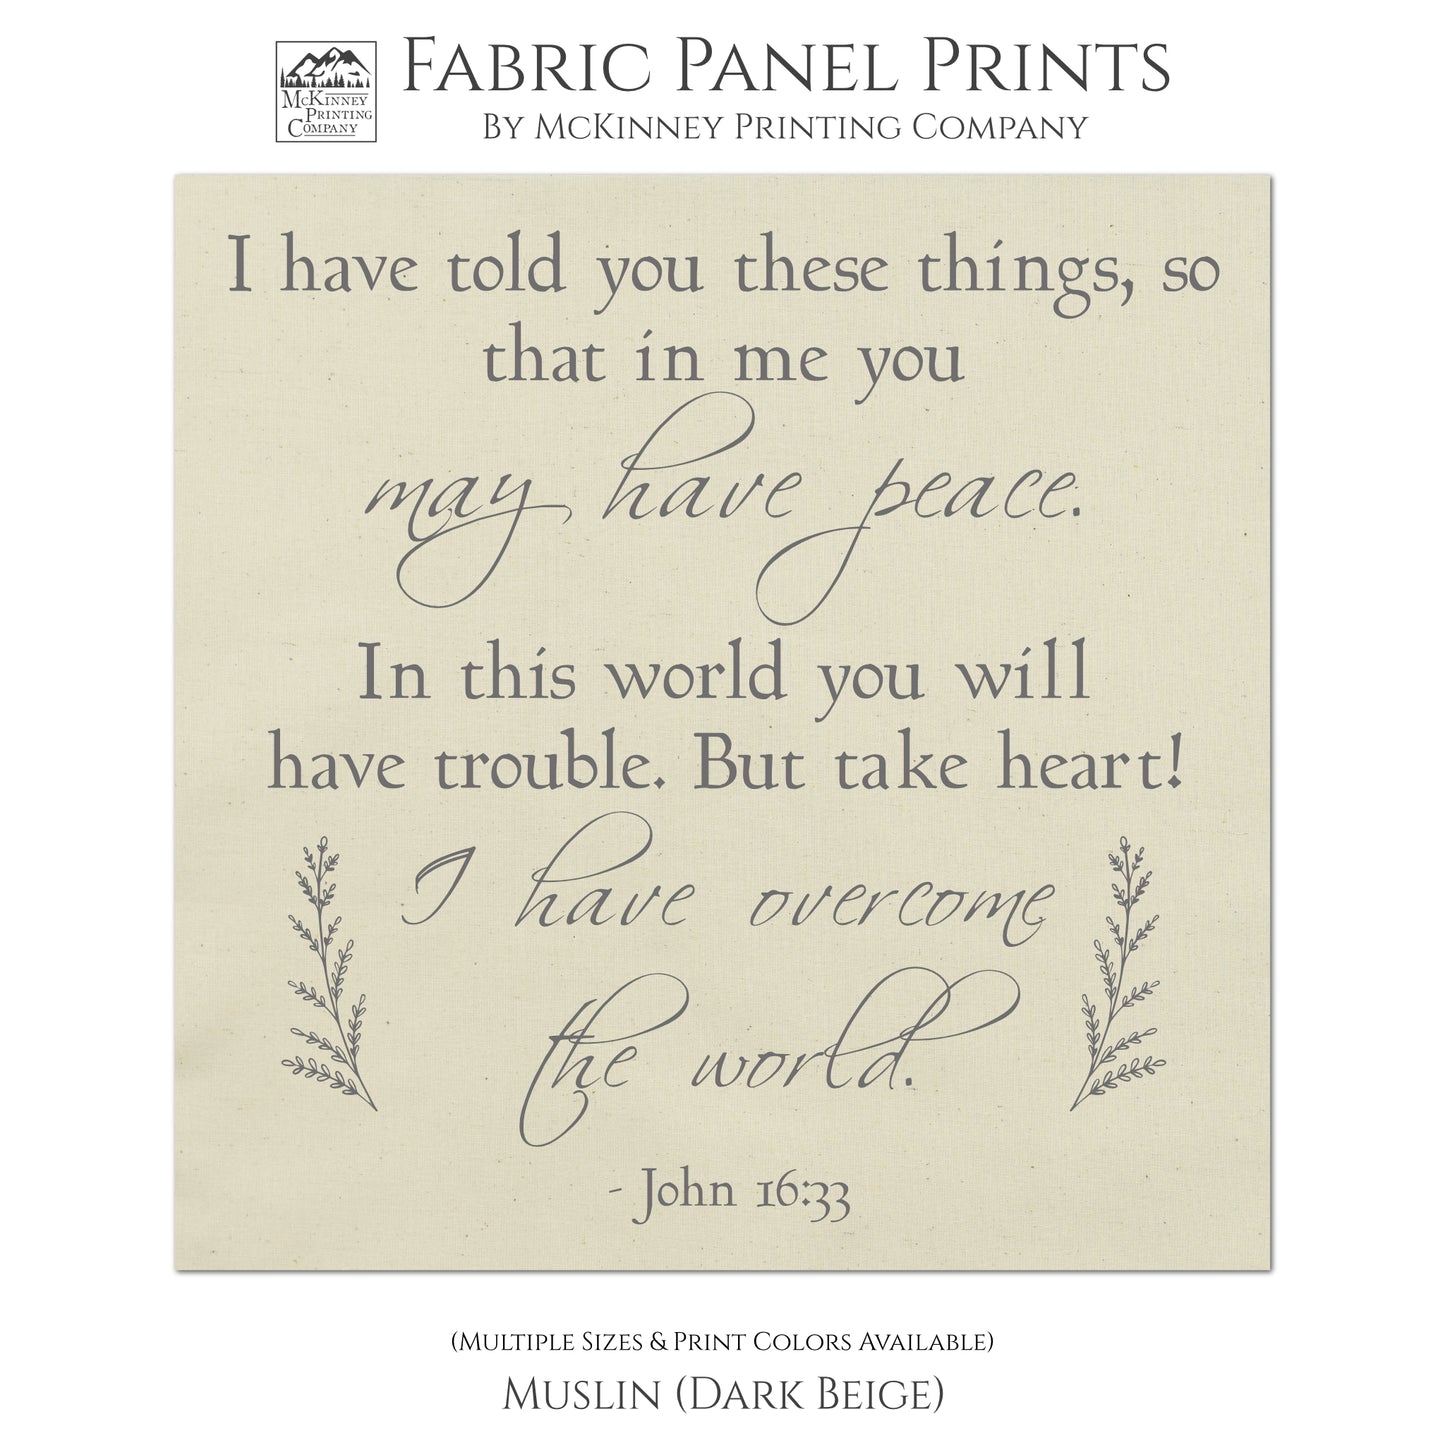 I have told you these things, so that in me you may have peace. In this world you will have trouble. But take heart! I have overcome the world. -John 16 33, Fabric Panel Print, Quilt Block, Bible Verse Wall Art - Muslin